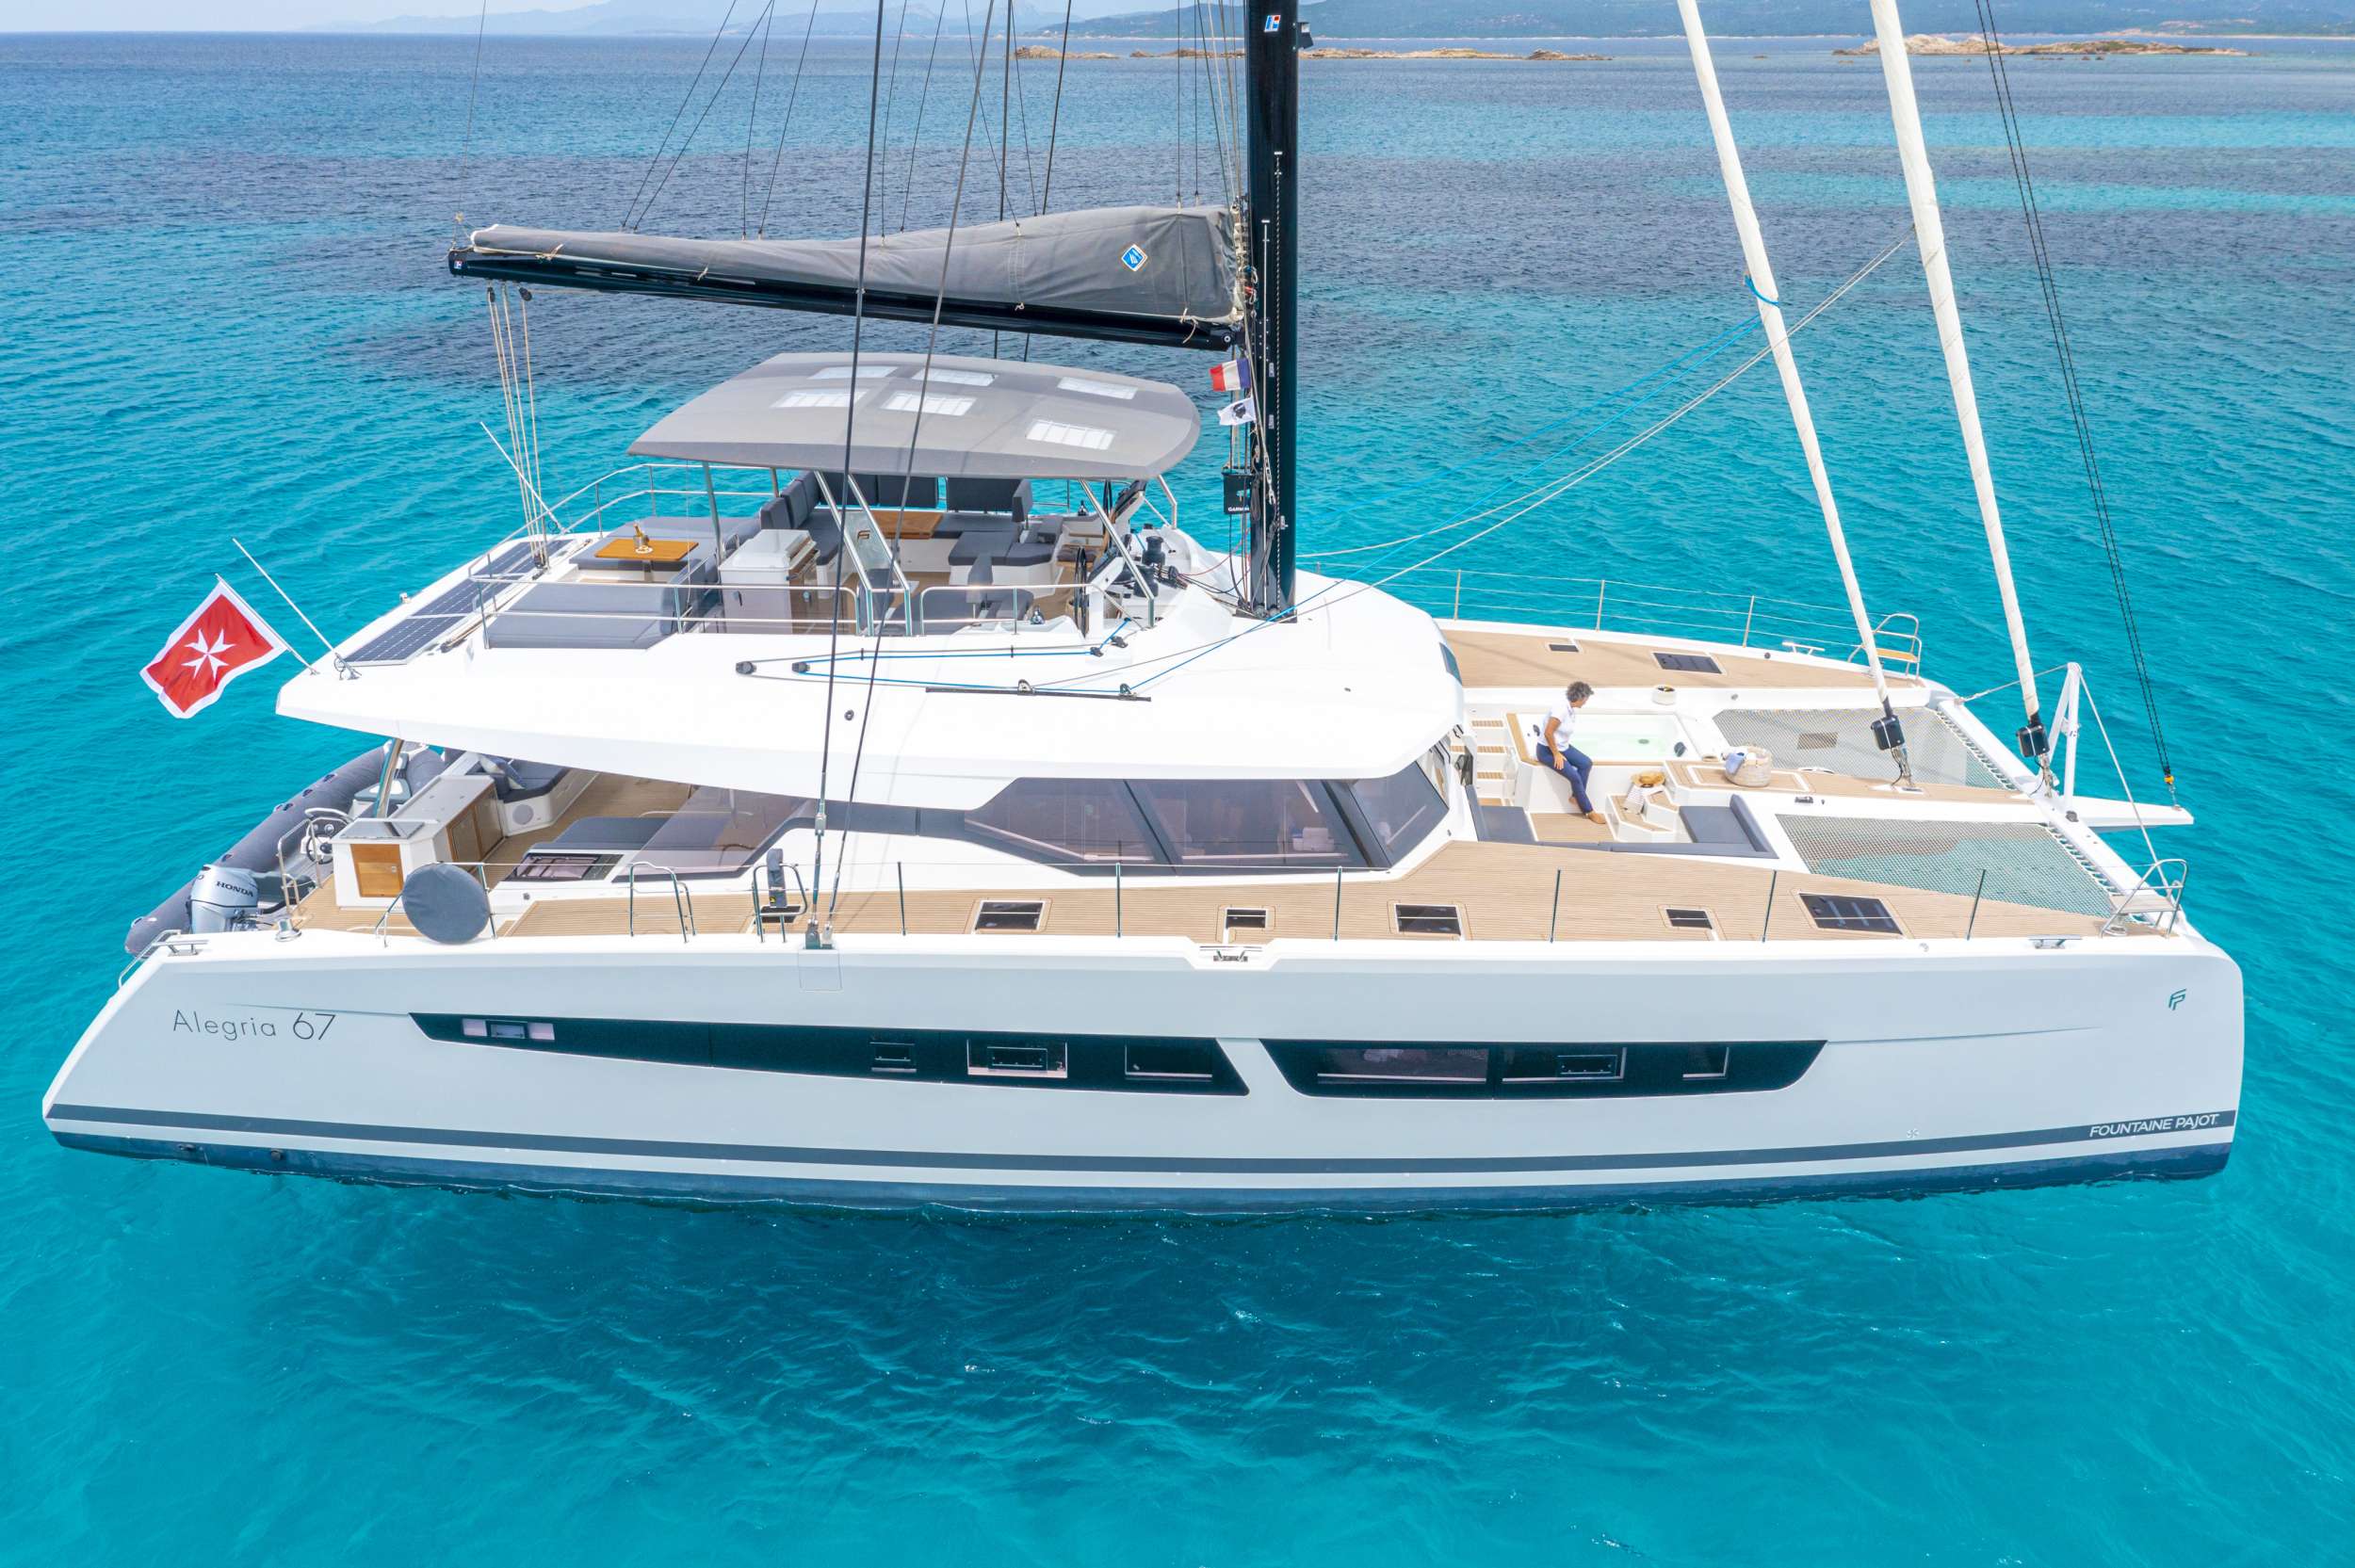 SEMPER FIDELIS  - Luxury yacht charter St Vincent and the Grenadines & Boat hire in Bahamas & Caribbean 1